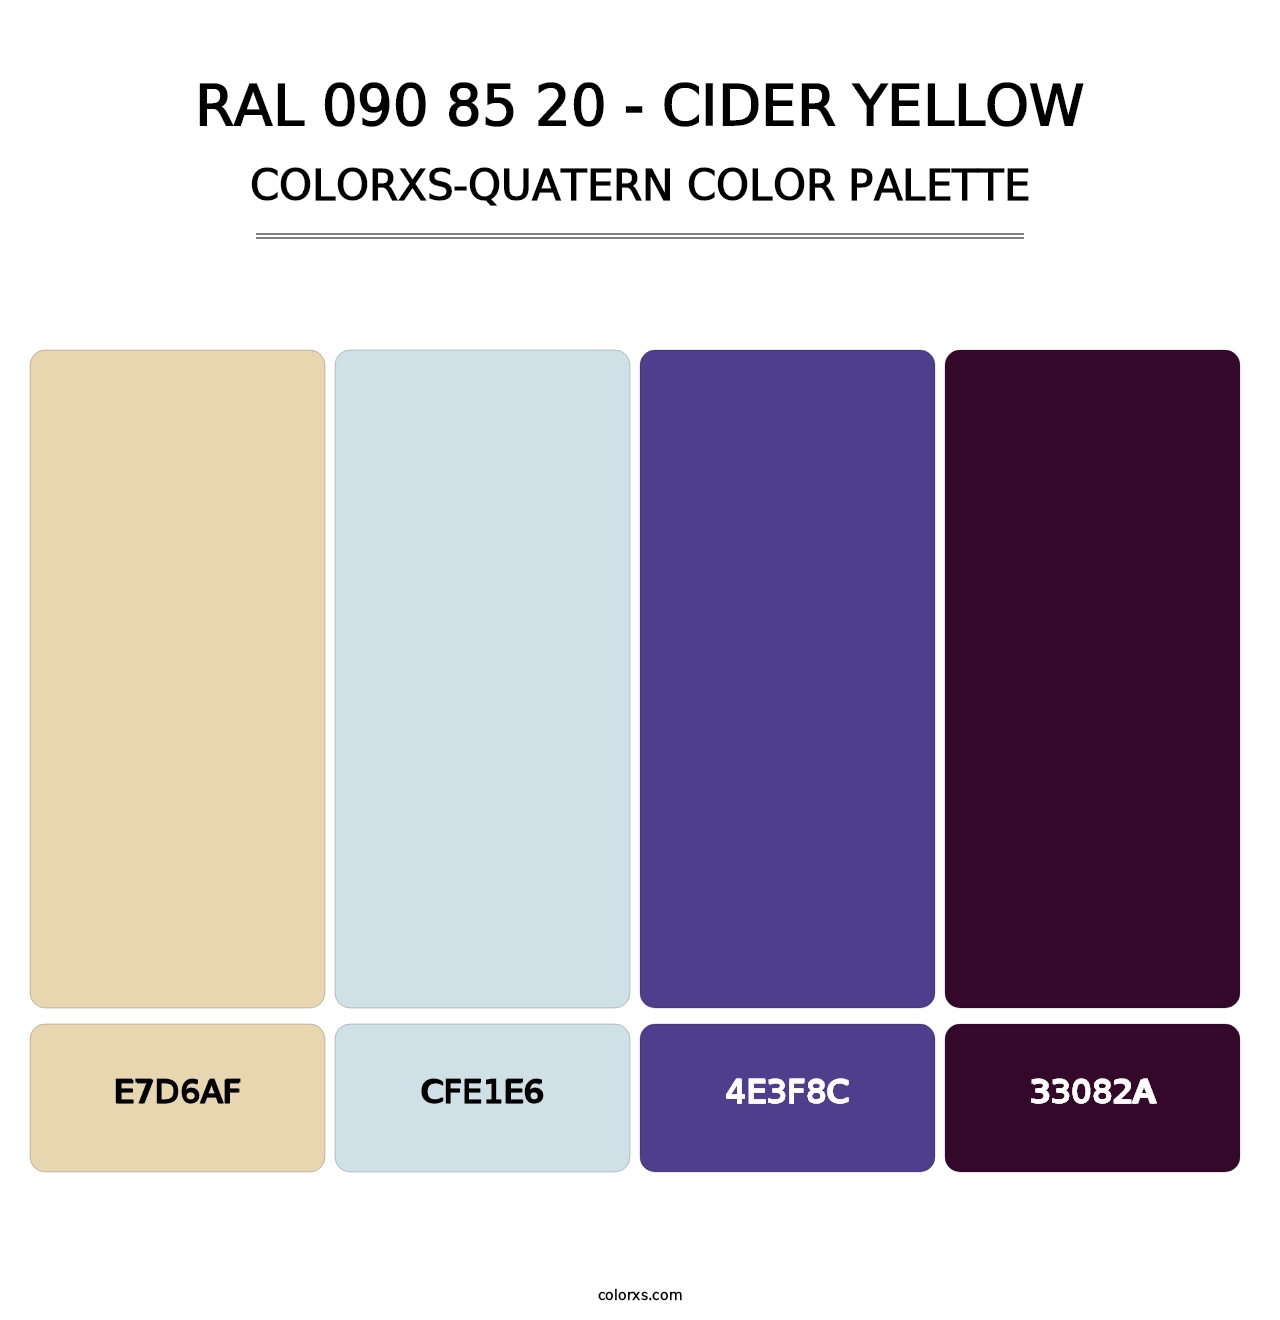 RAL 090 85 20 - Cider Yellow - Colorxs Quatern Palette